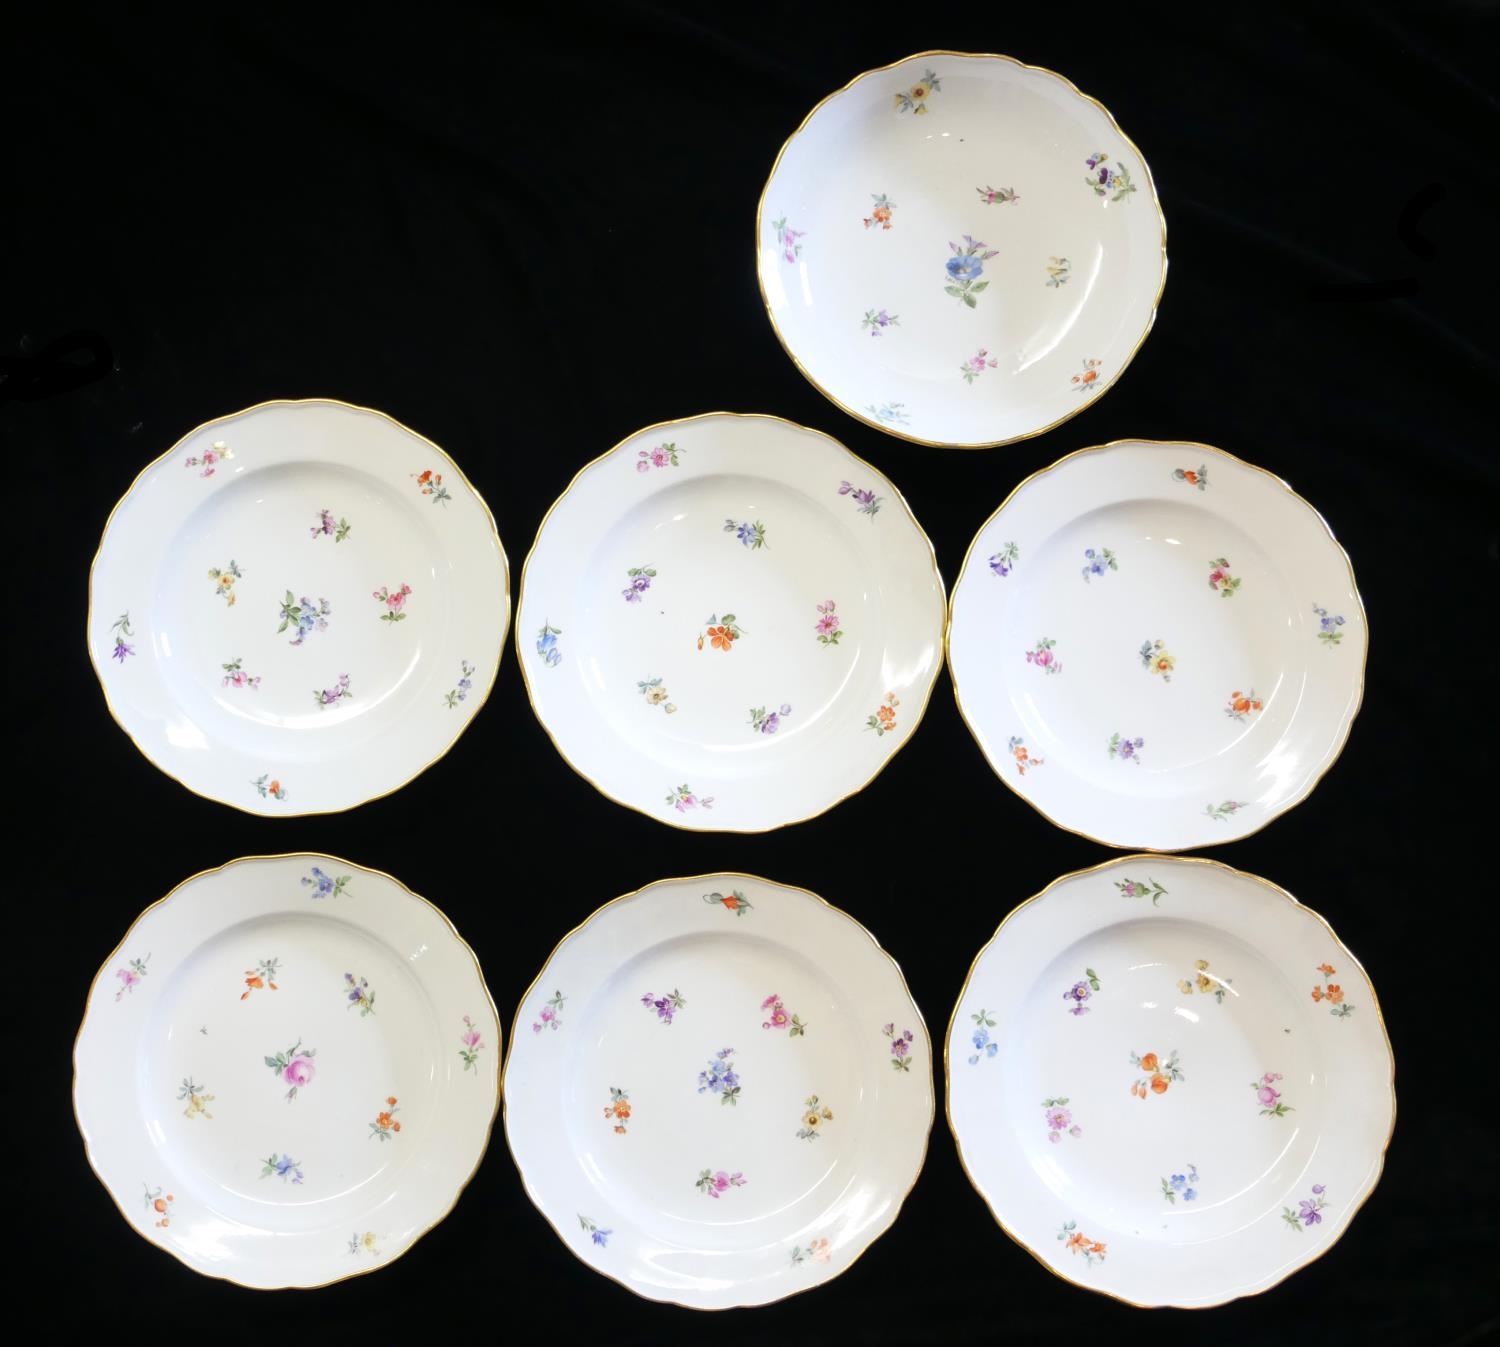 MESSIEN, A SET OF SIX EARLY 20TH CENTURY PORCELAIN DINNER PLATES AND MATCHING SERVING BOWL Having